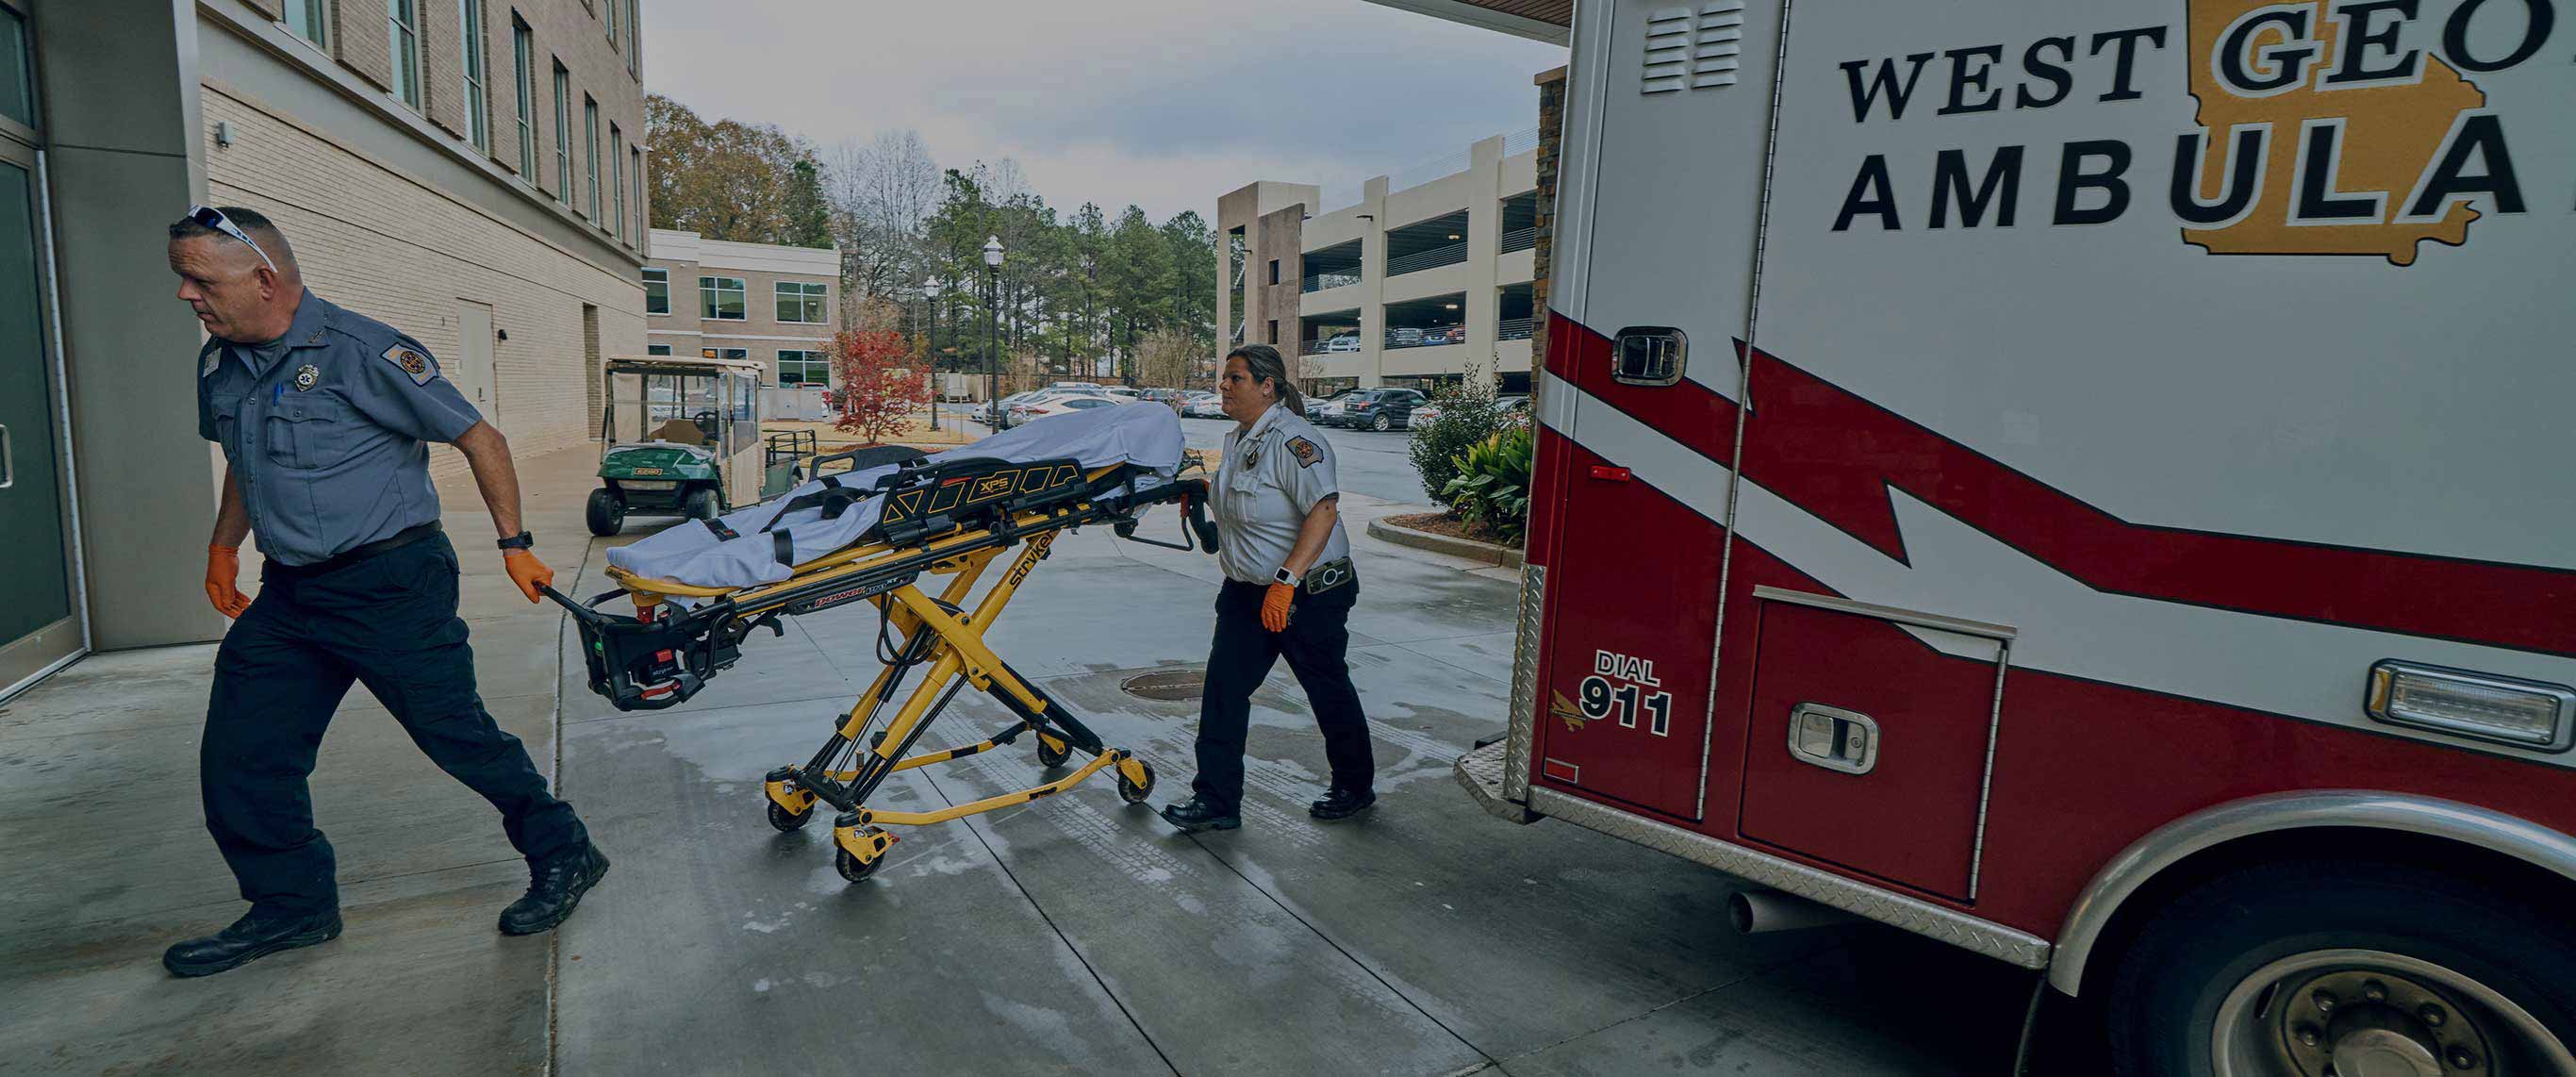 EMTs entering a building with an empty stretcher.